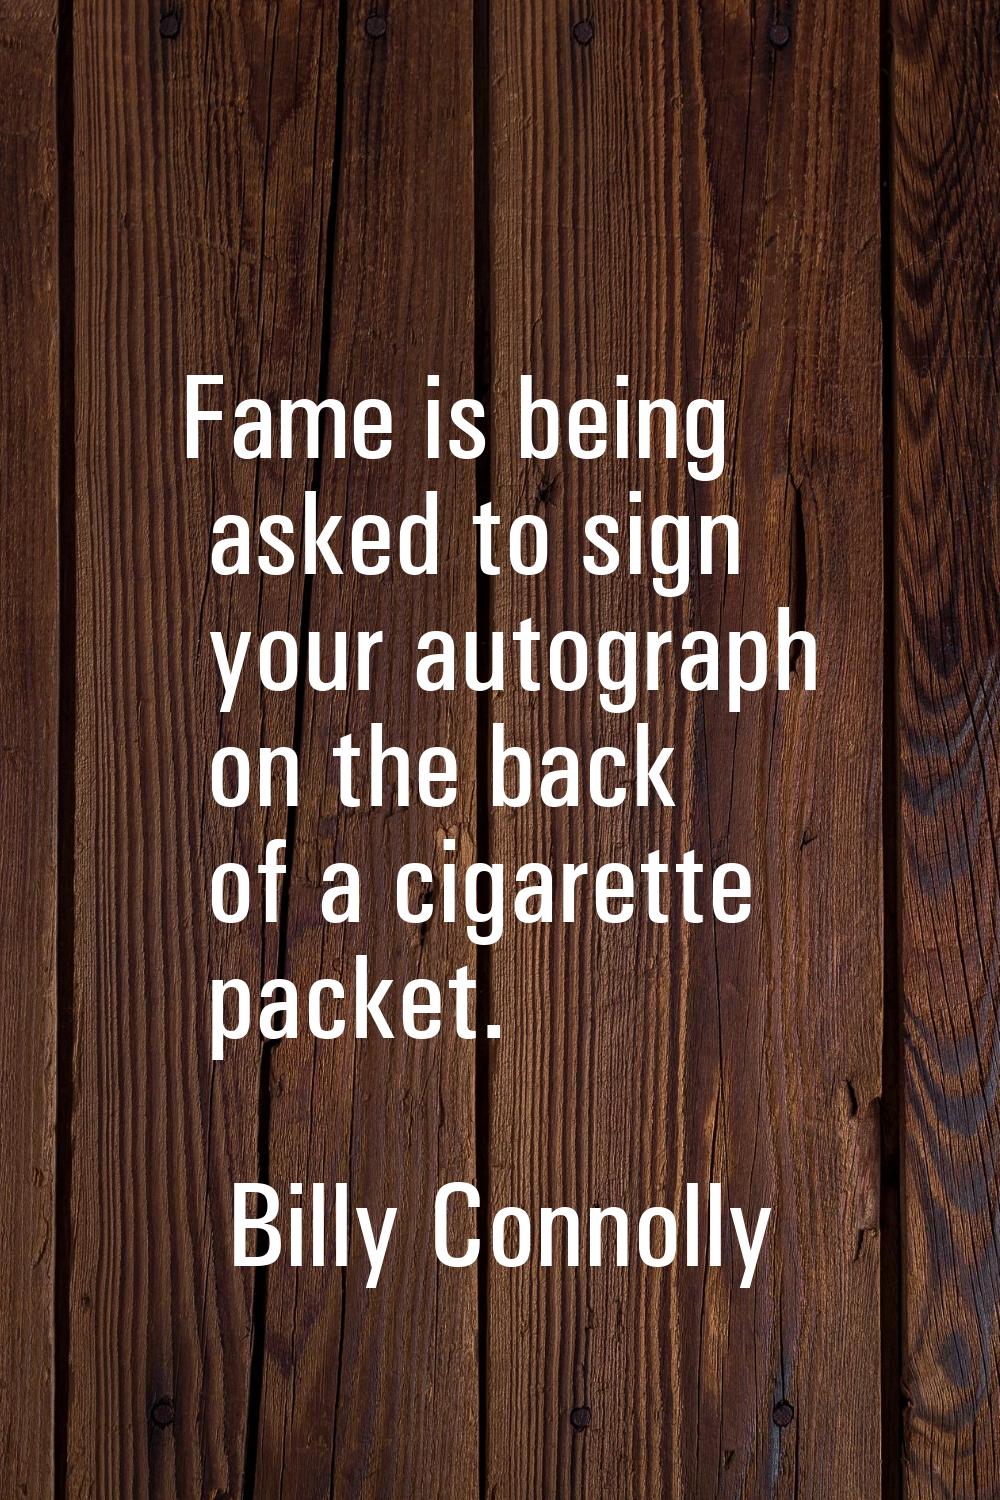 Fame is being asked to sign your autograph on the back of a cigarette packet.